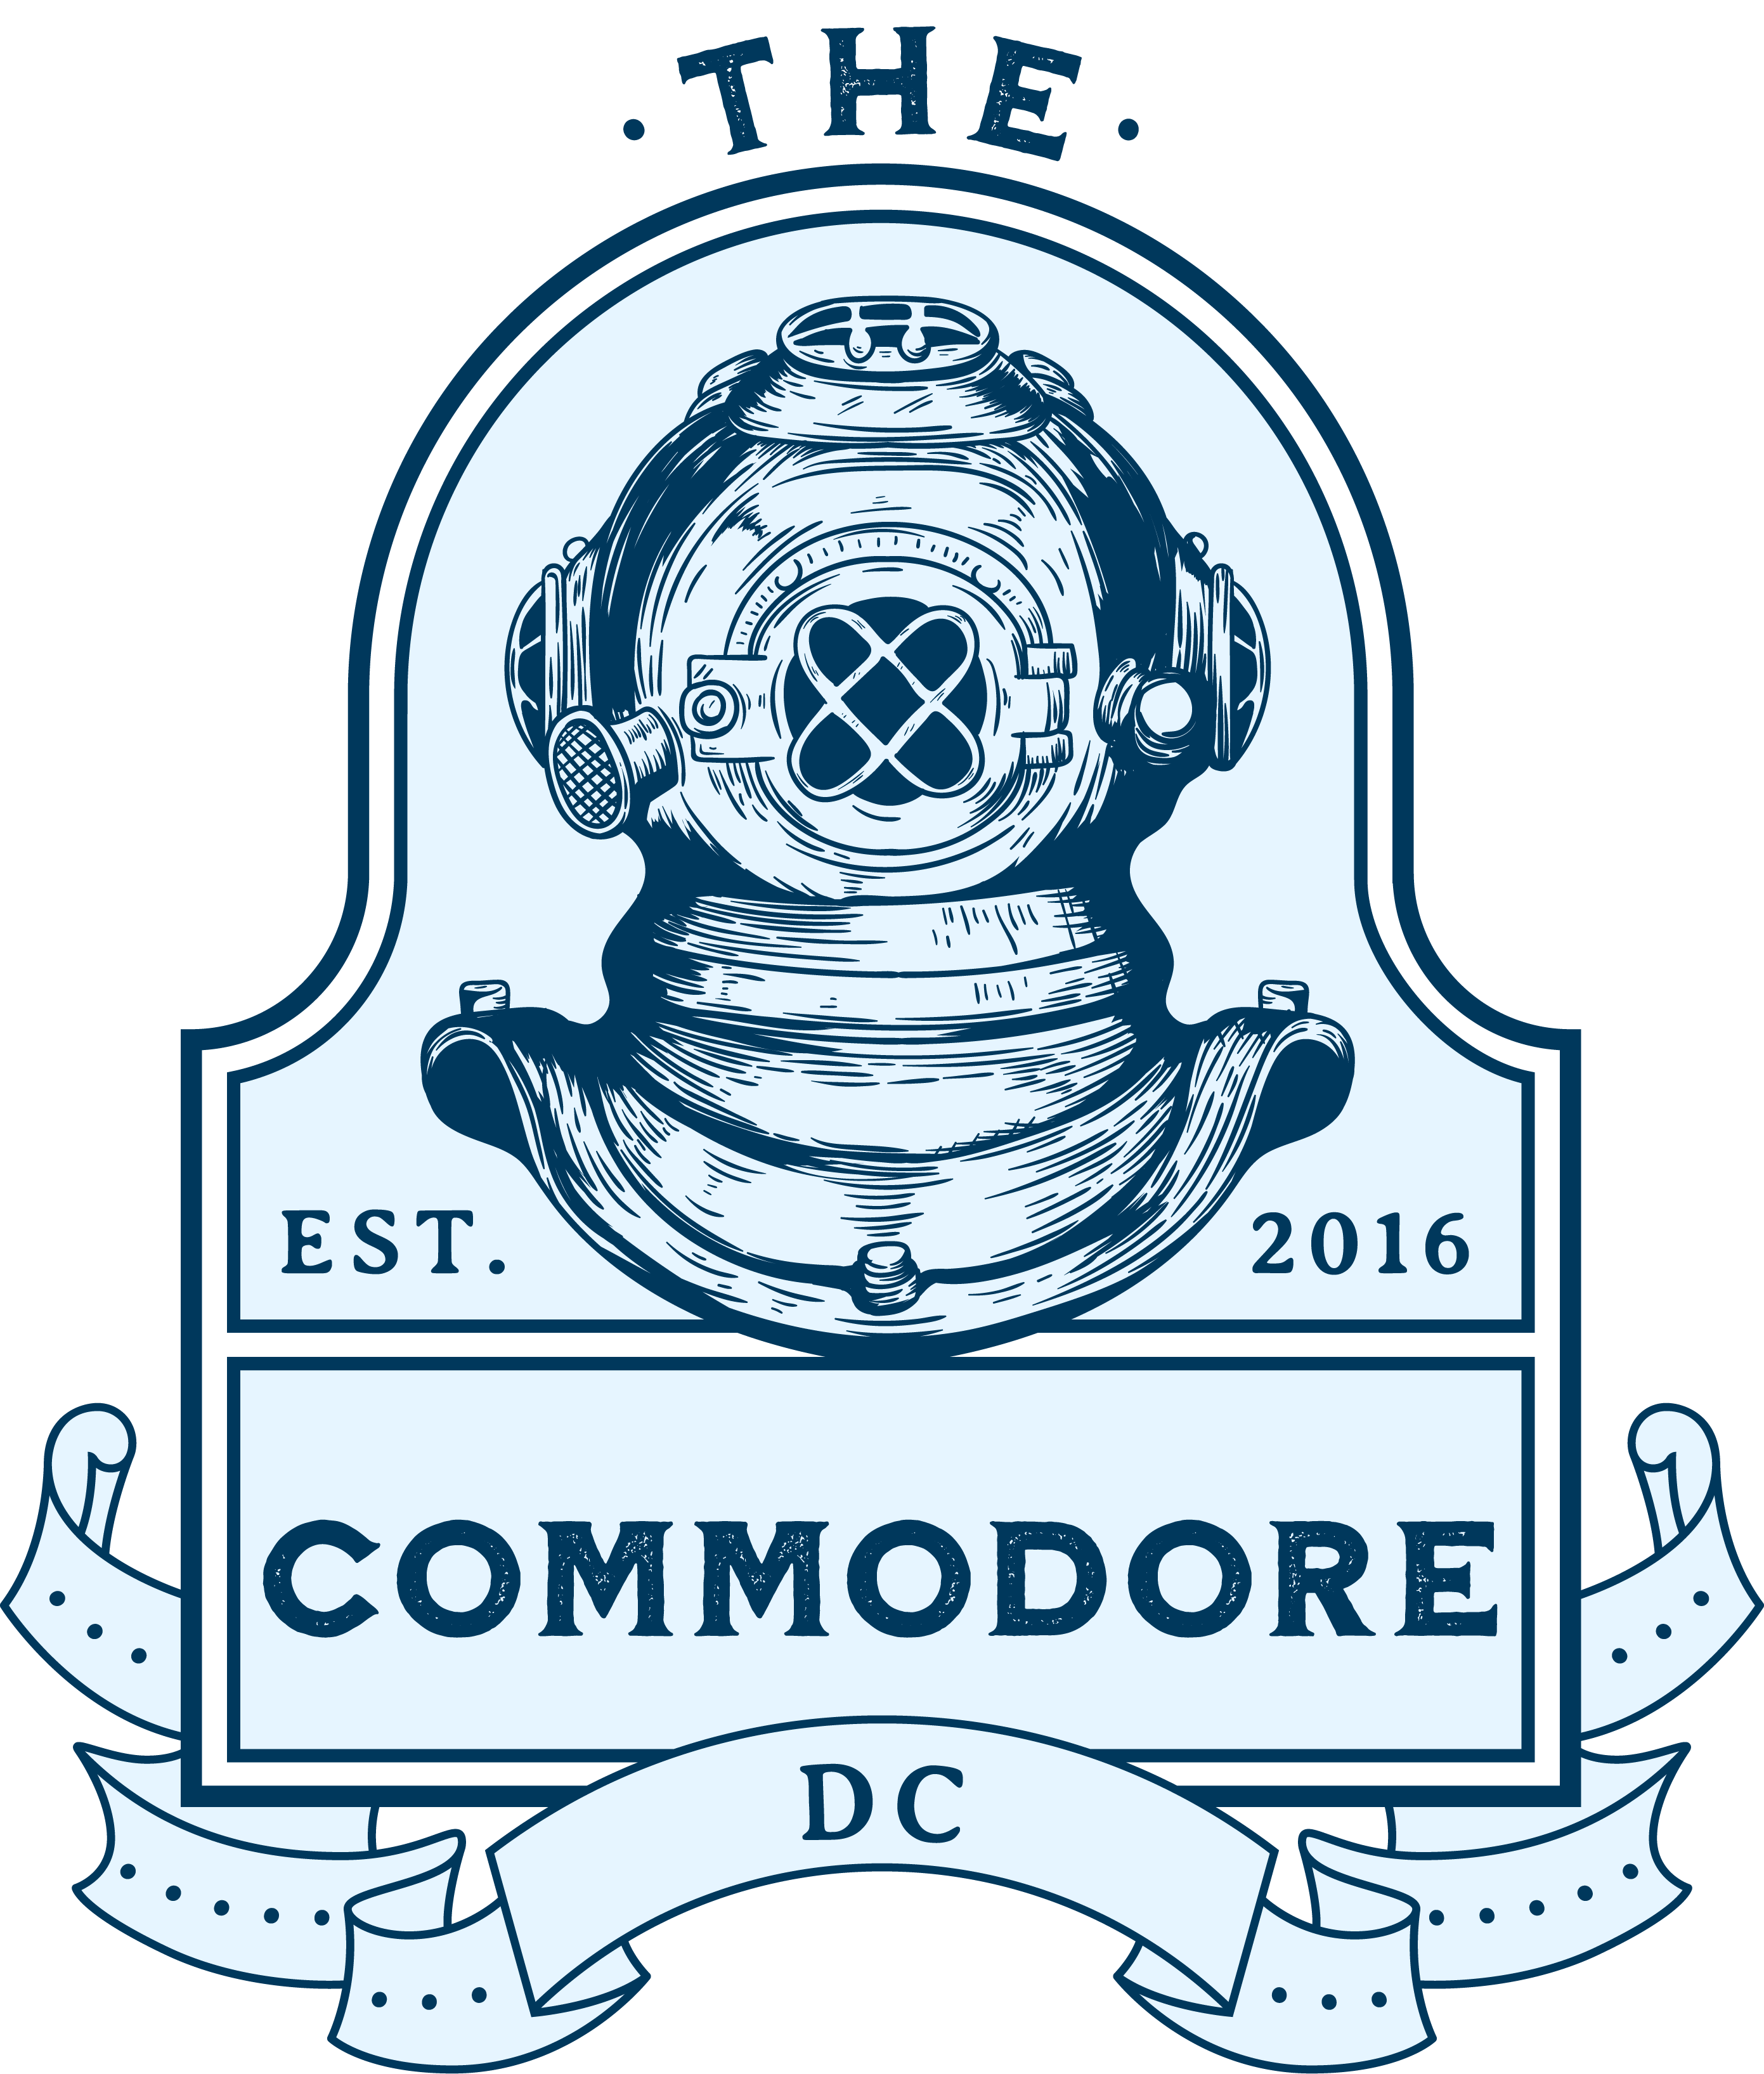 The Commodore DC 1636 17th St NW